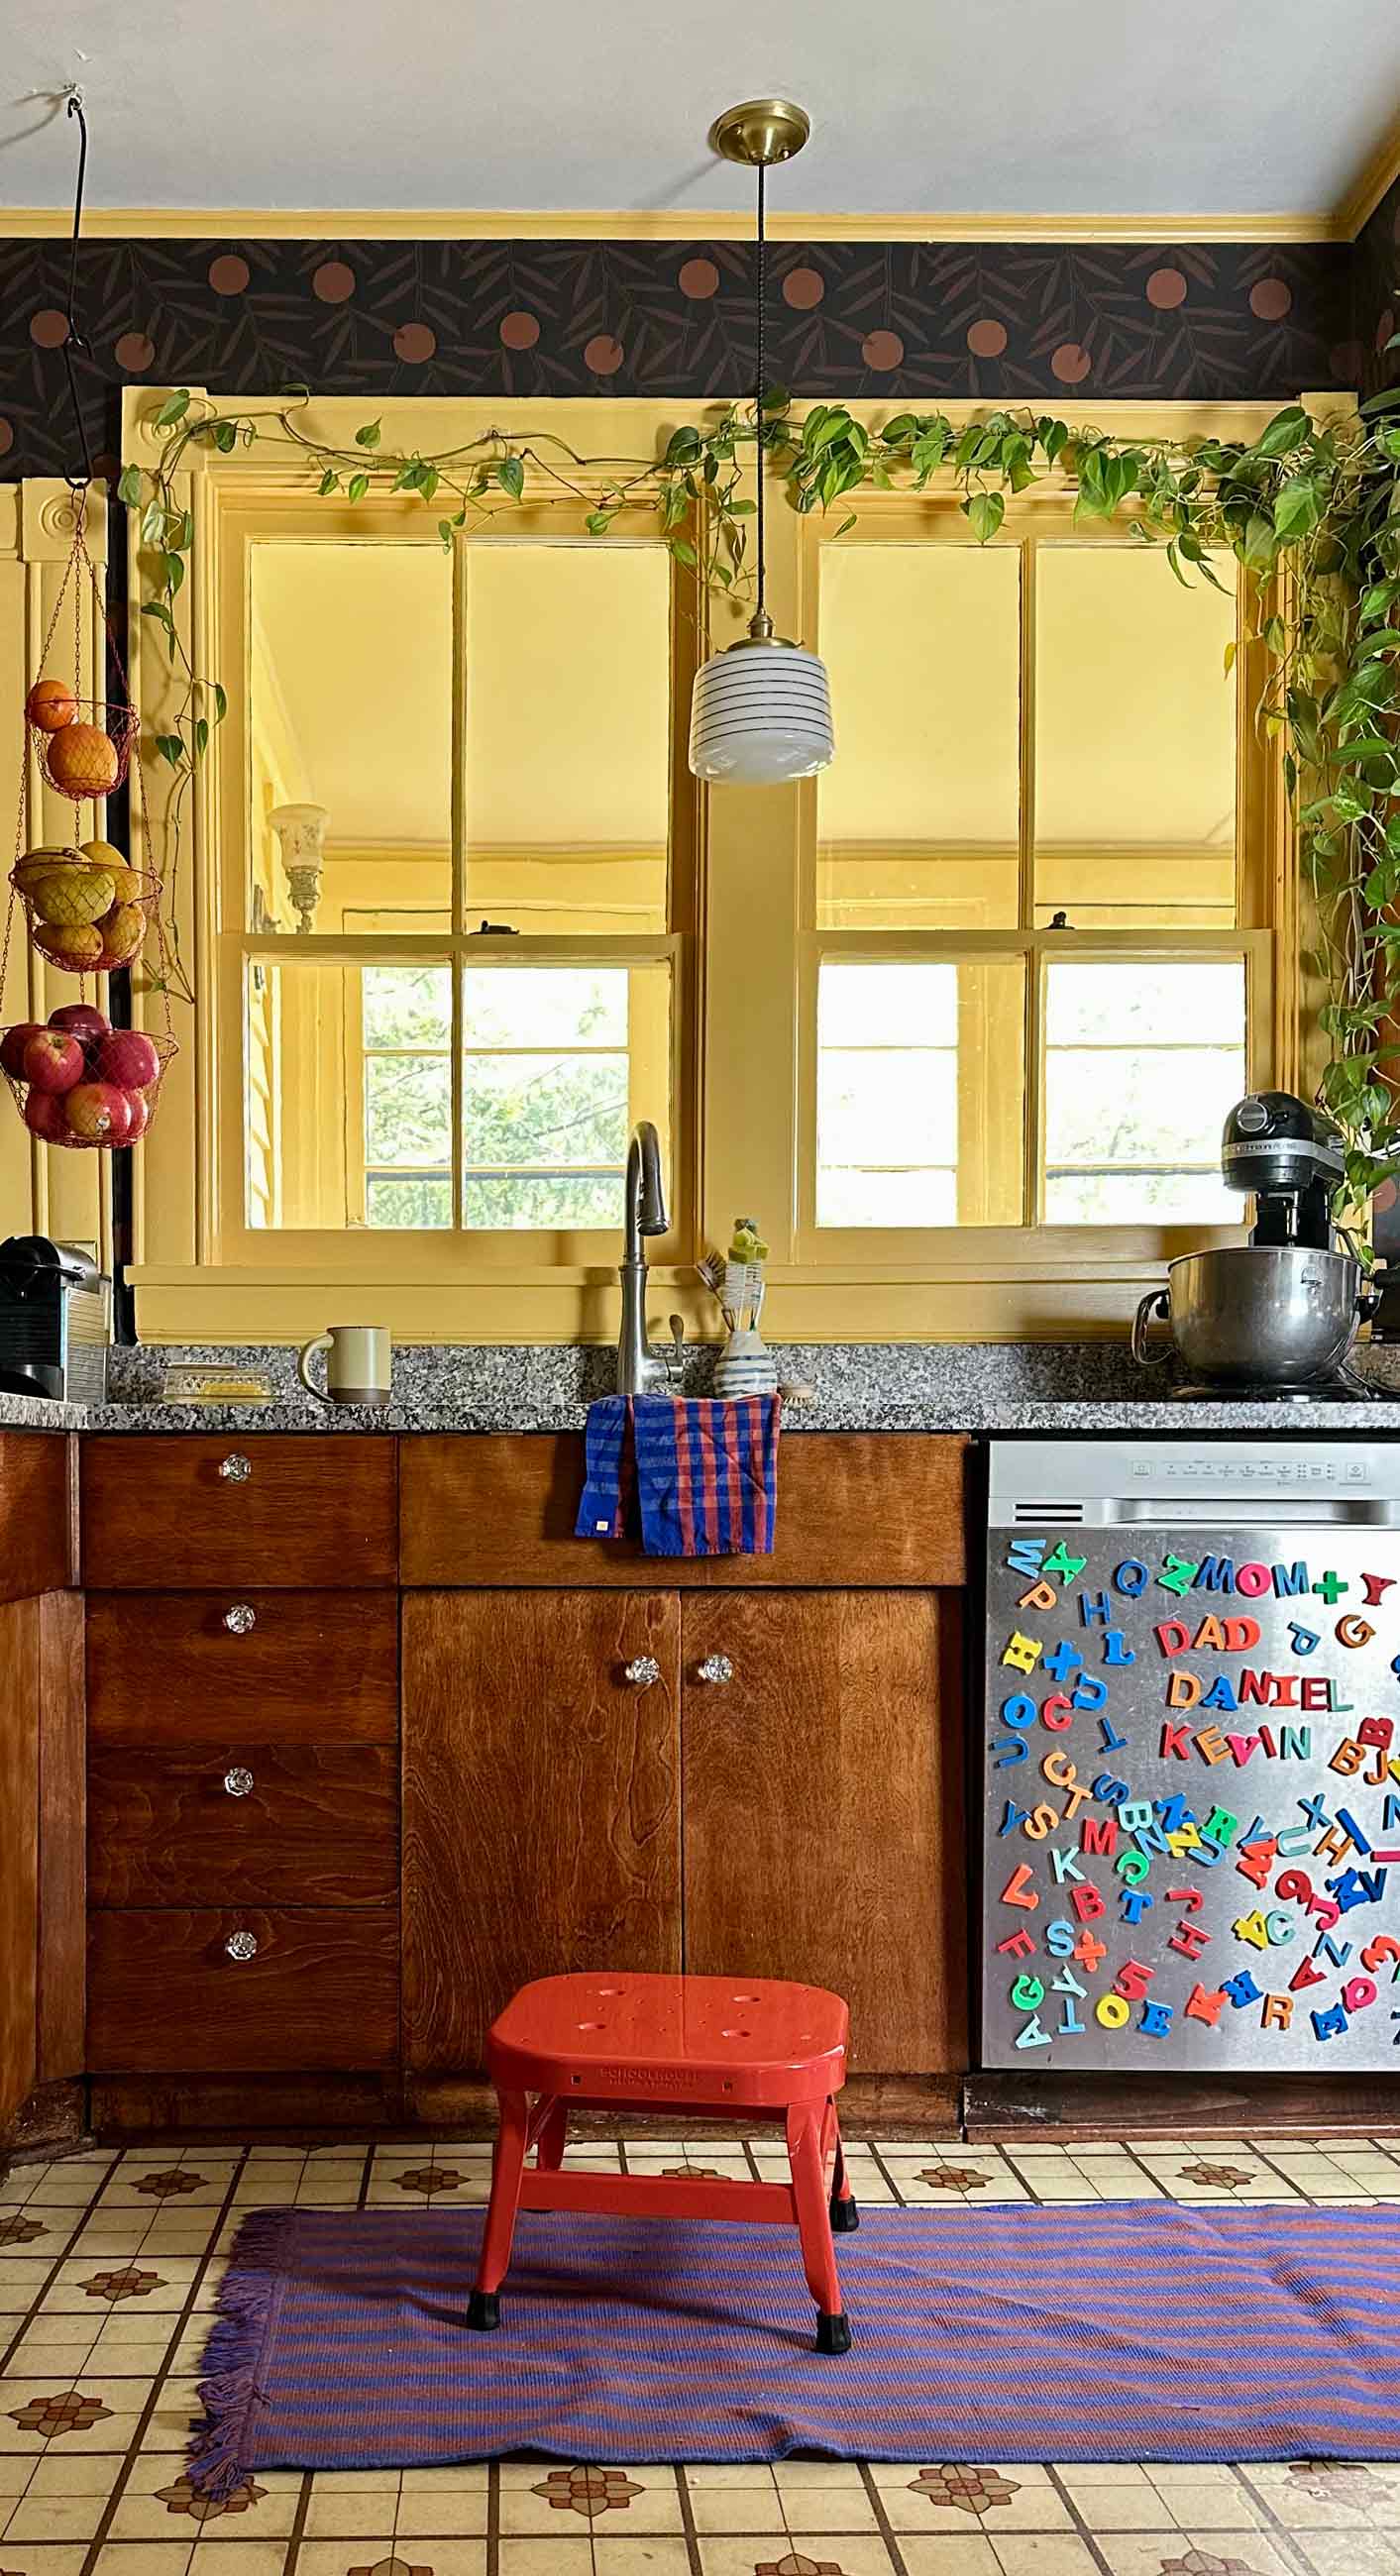 Colorful kitchen with red stool in front of sink.